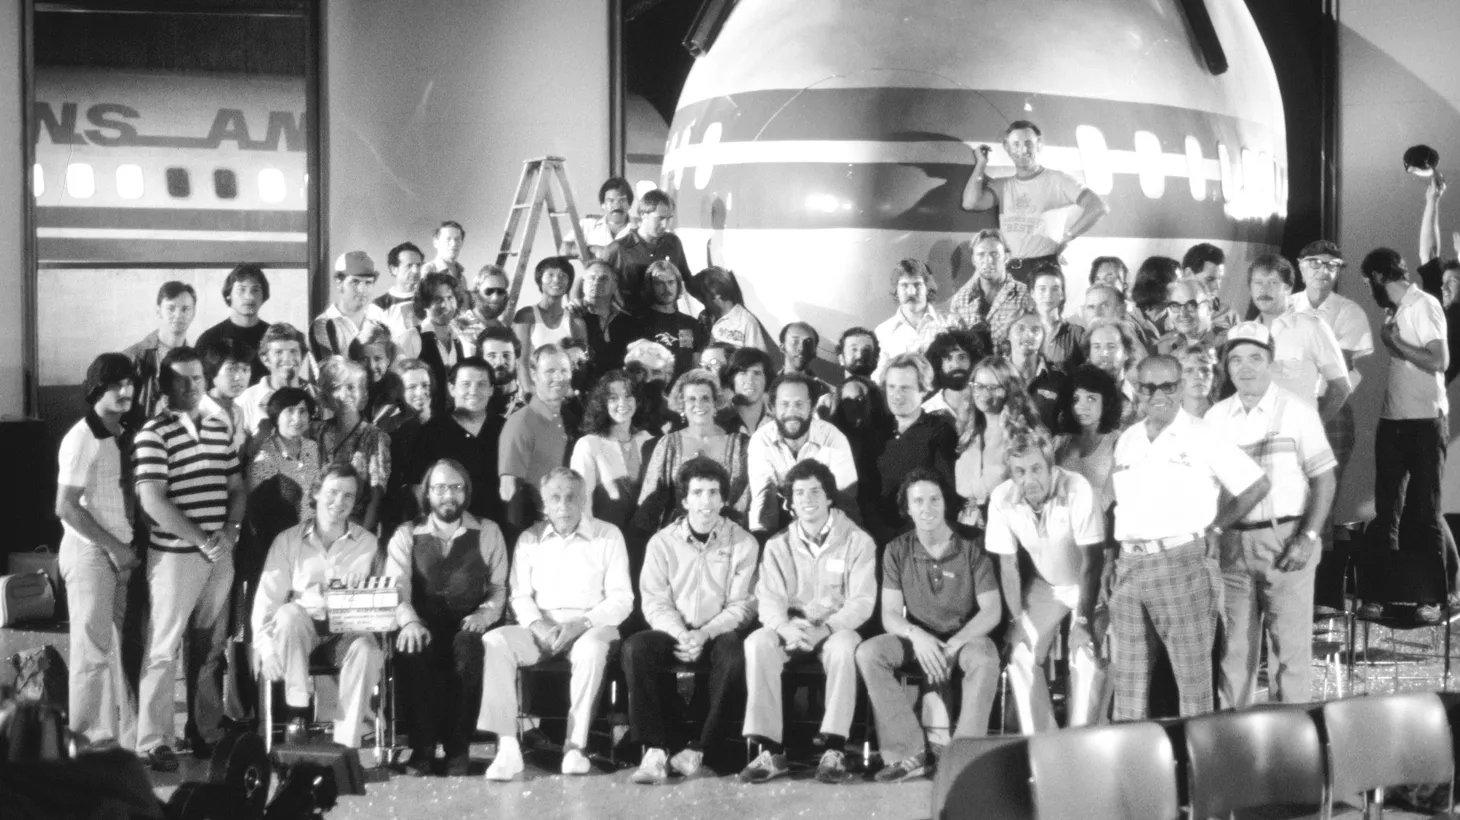 The cast and crew of “Airplane!” pose for a group photo after filming the final scene of the 747 crashing through the terminal.